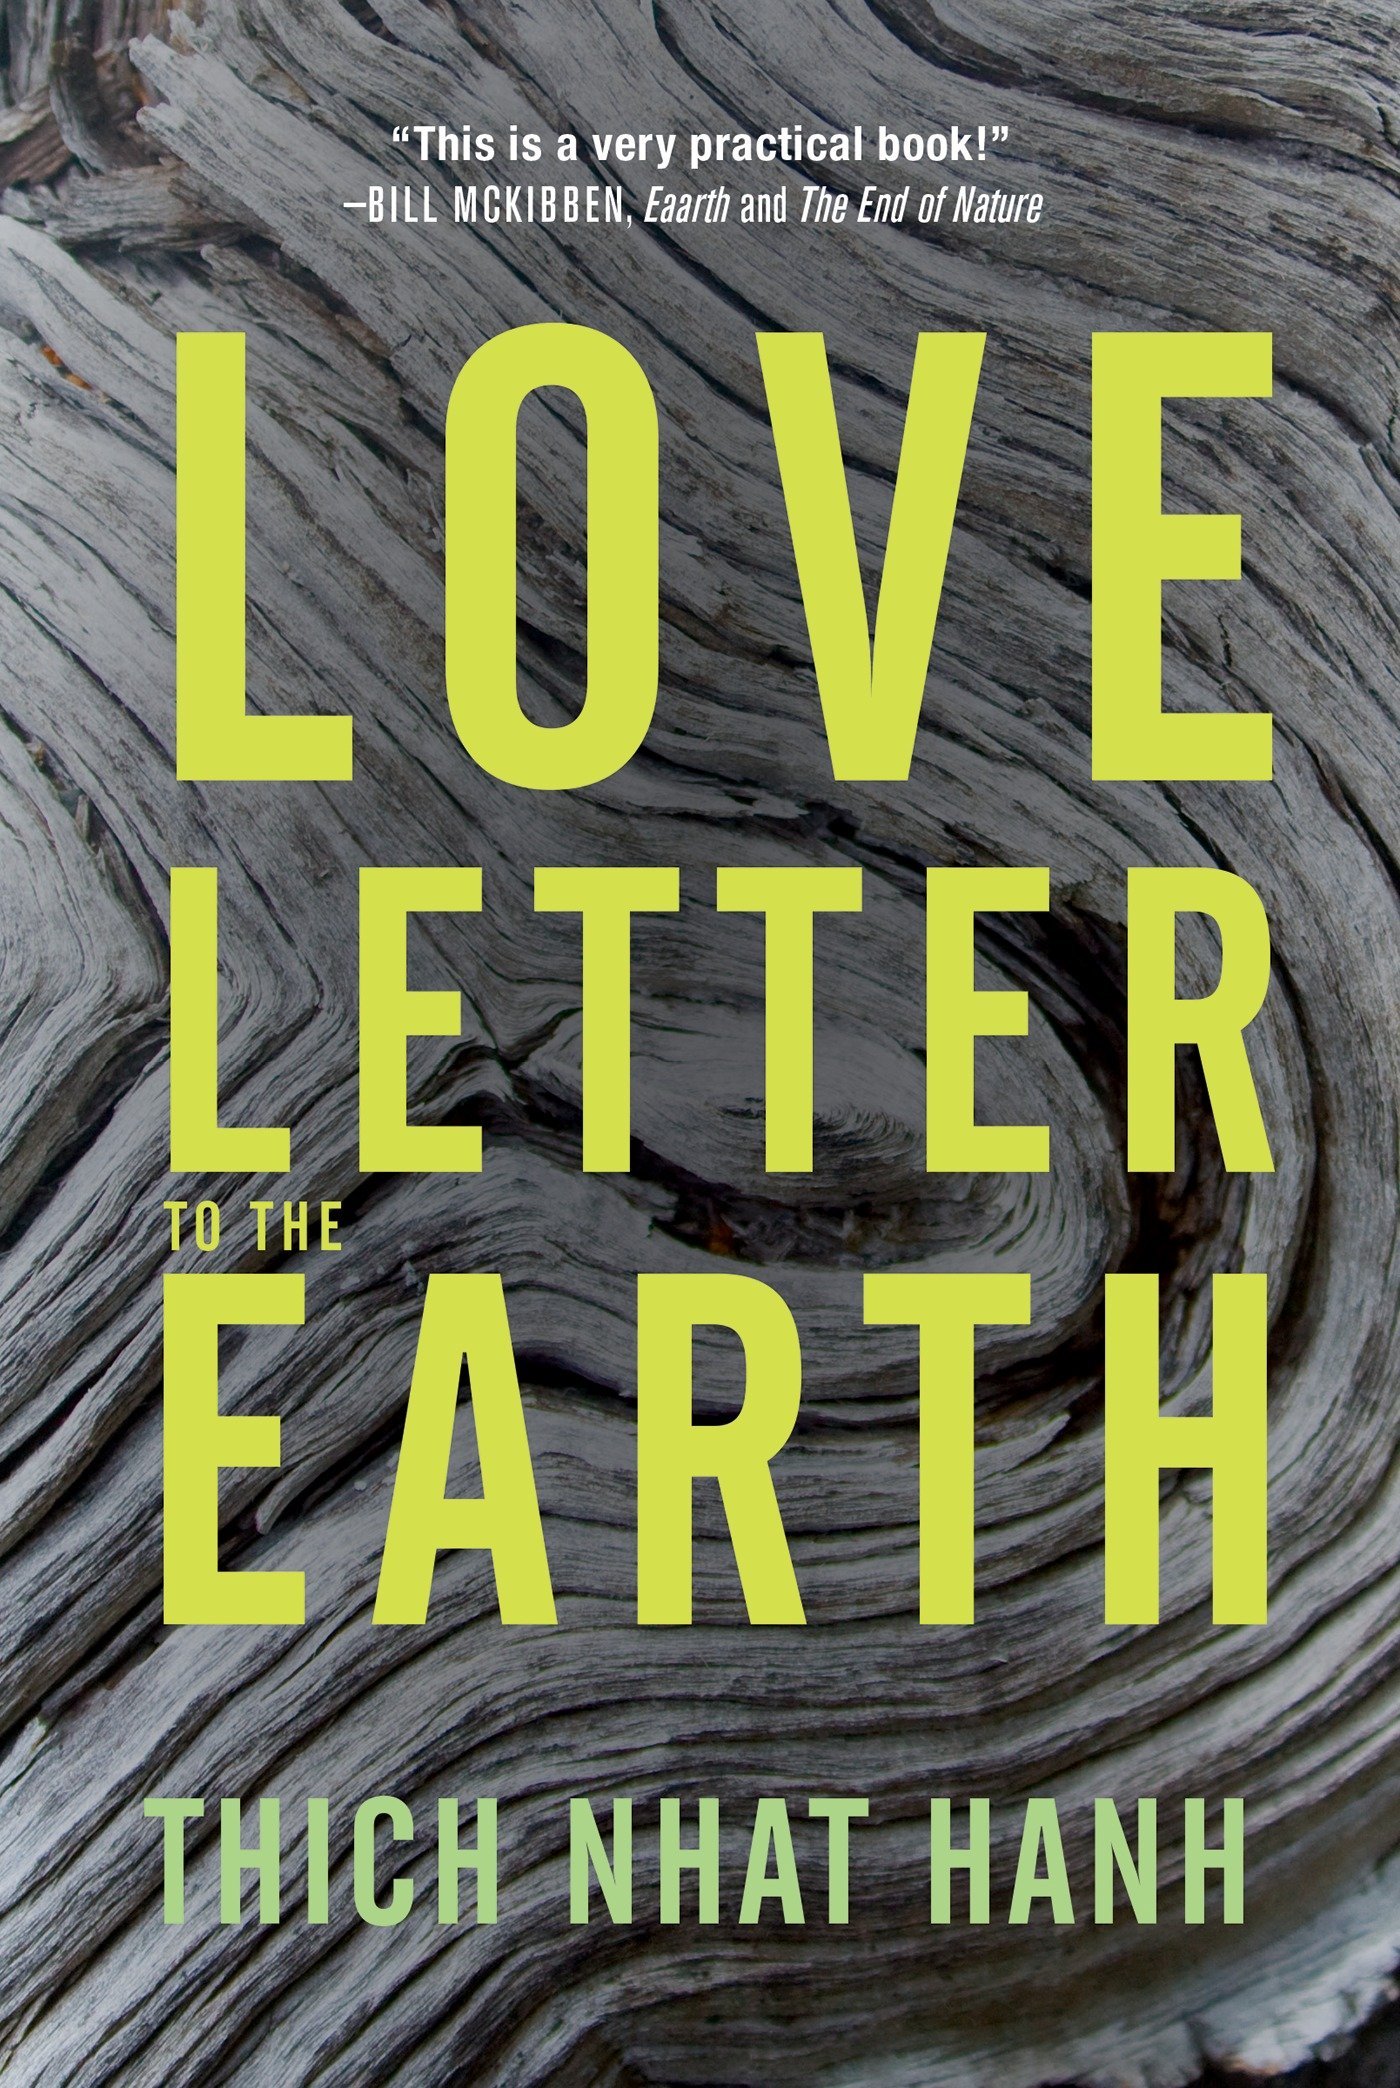 Thich Nhat Hanh: Love Letter to the Earth